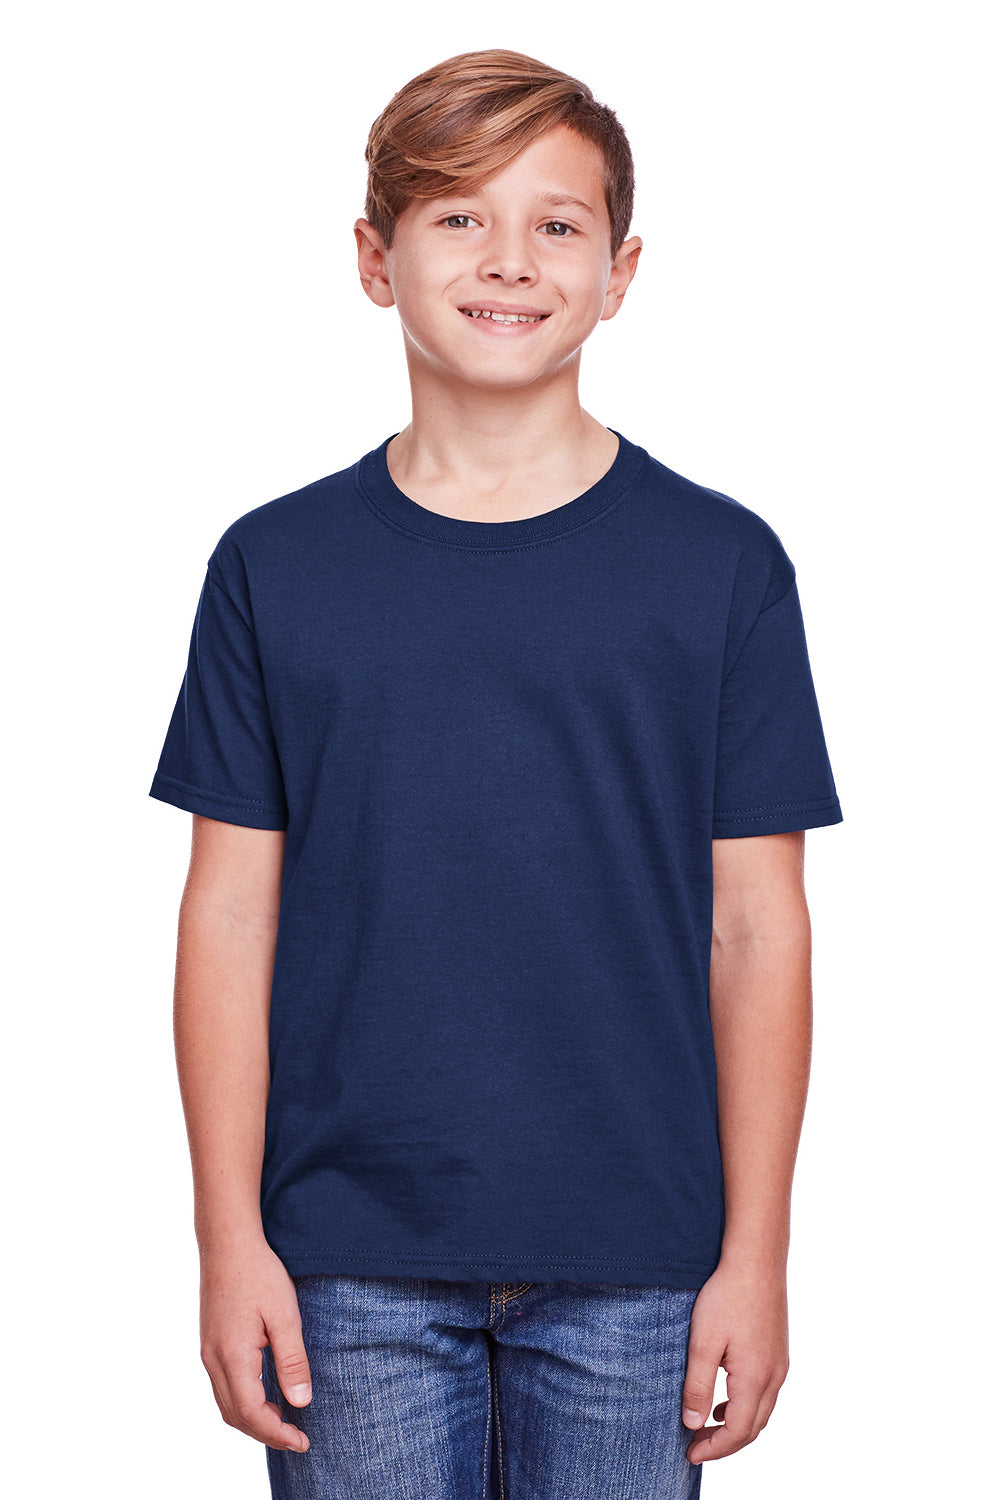 Fruit Of The Loom IC47BR Youth Iconic Short Sleeve Crewneck T-Shirt Navy Blue Front